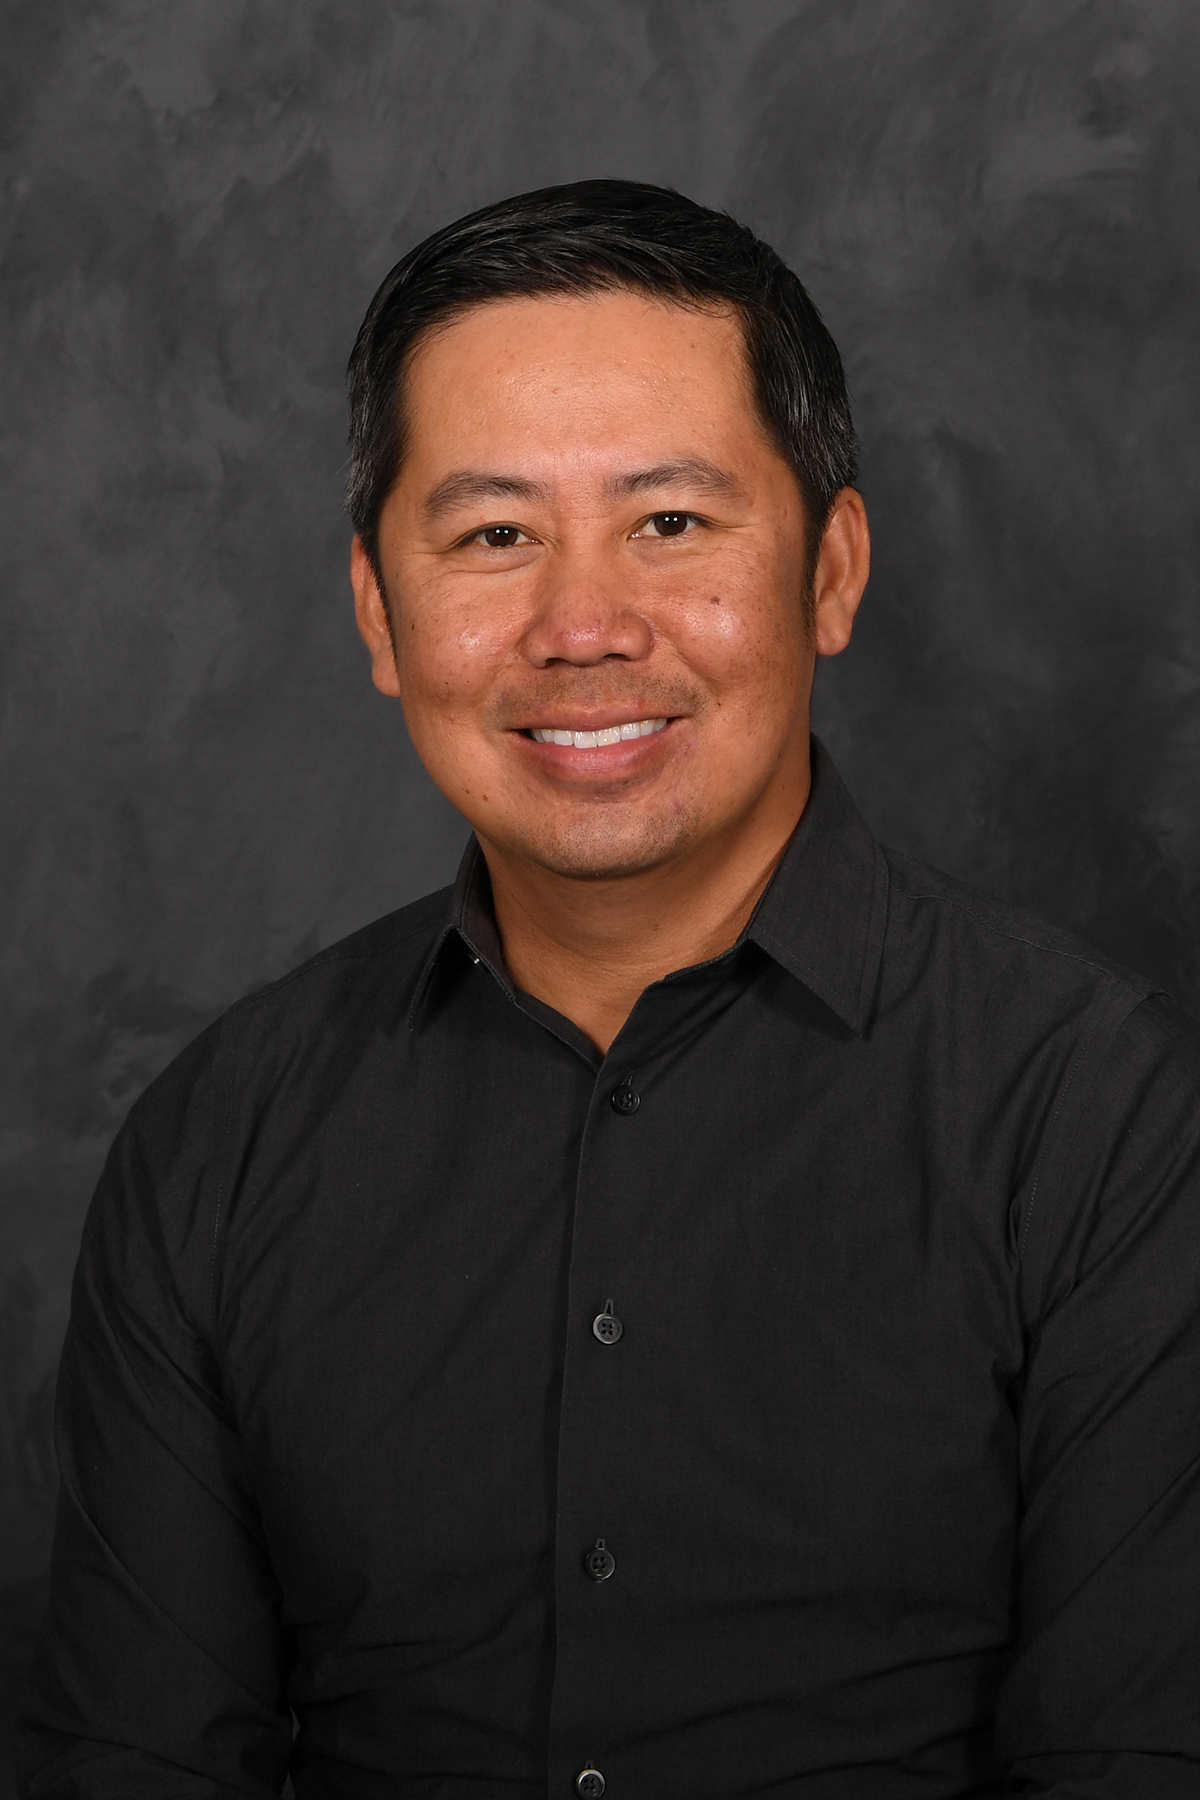 Richard Lee the Project Coordinator for Adult Education at Orange Coast College